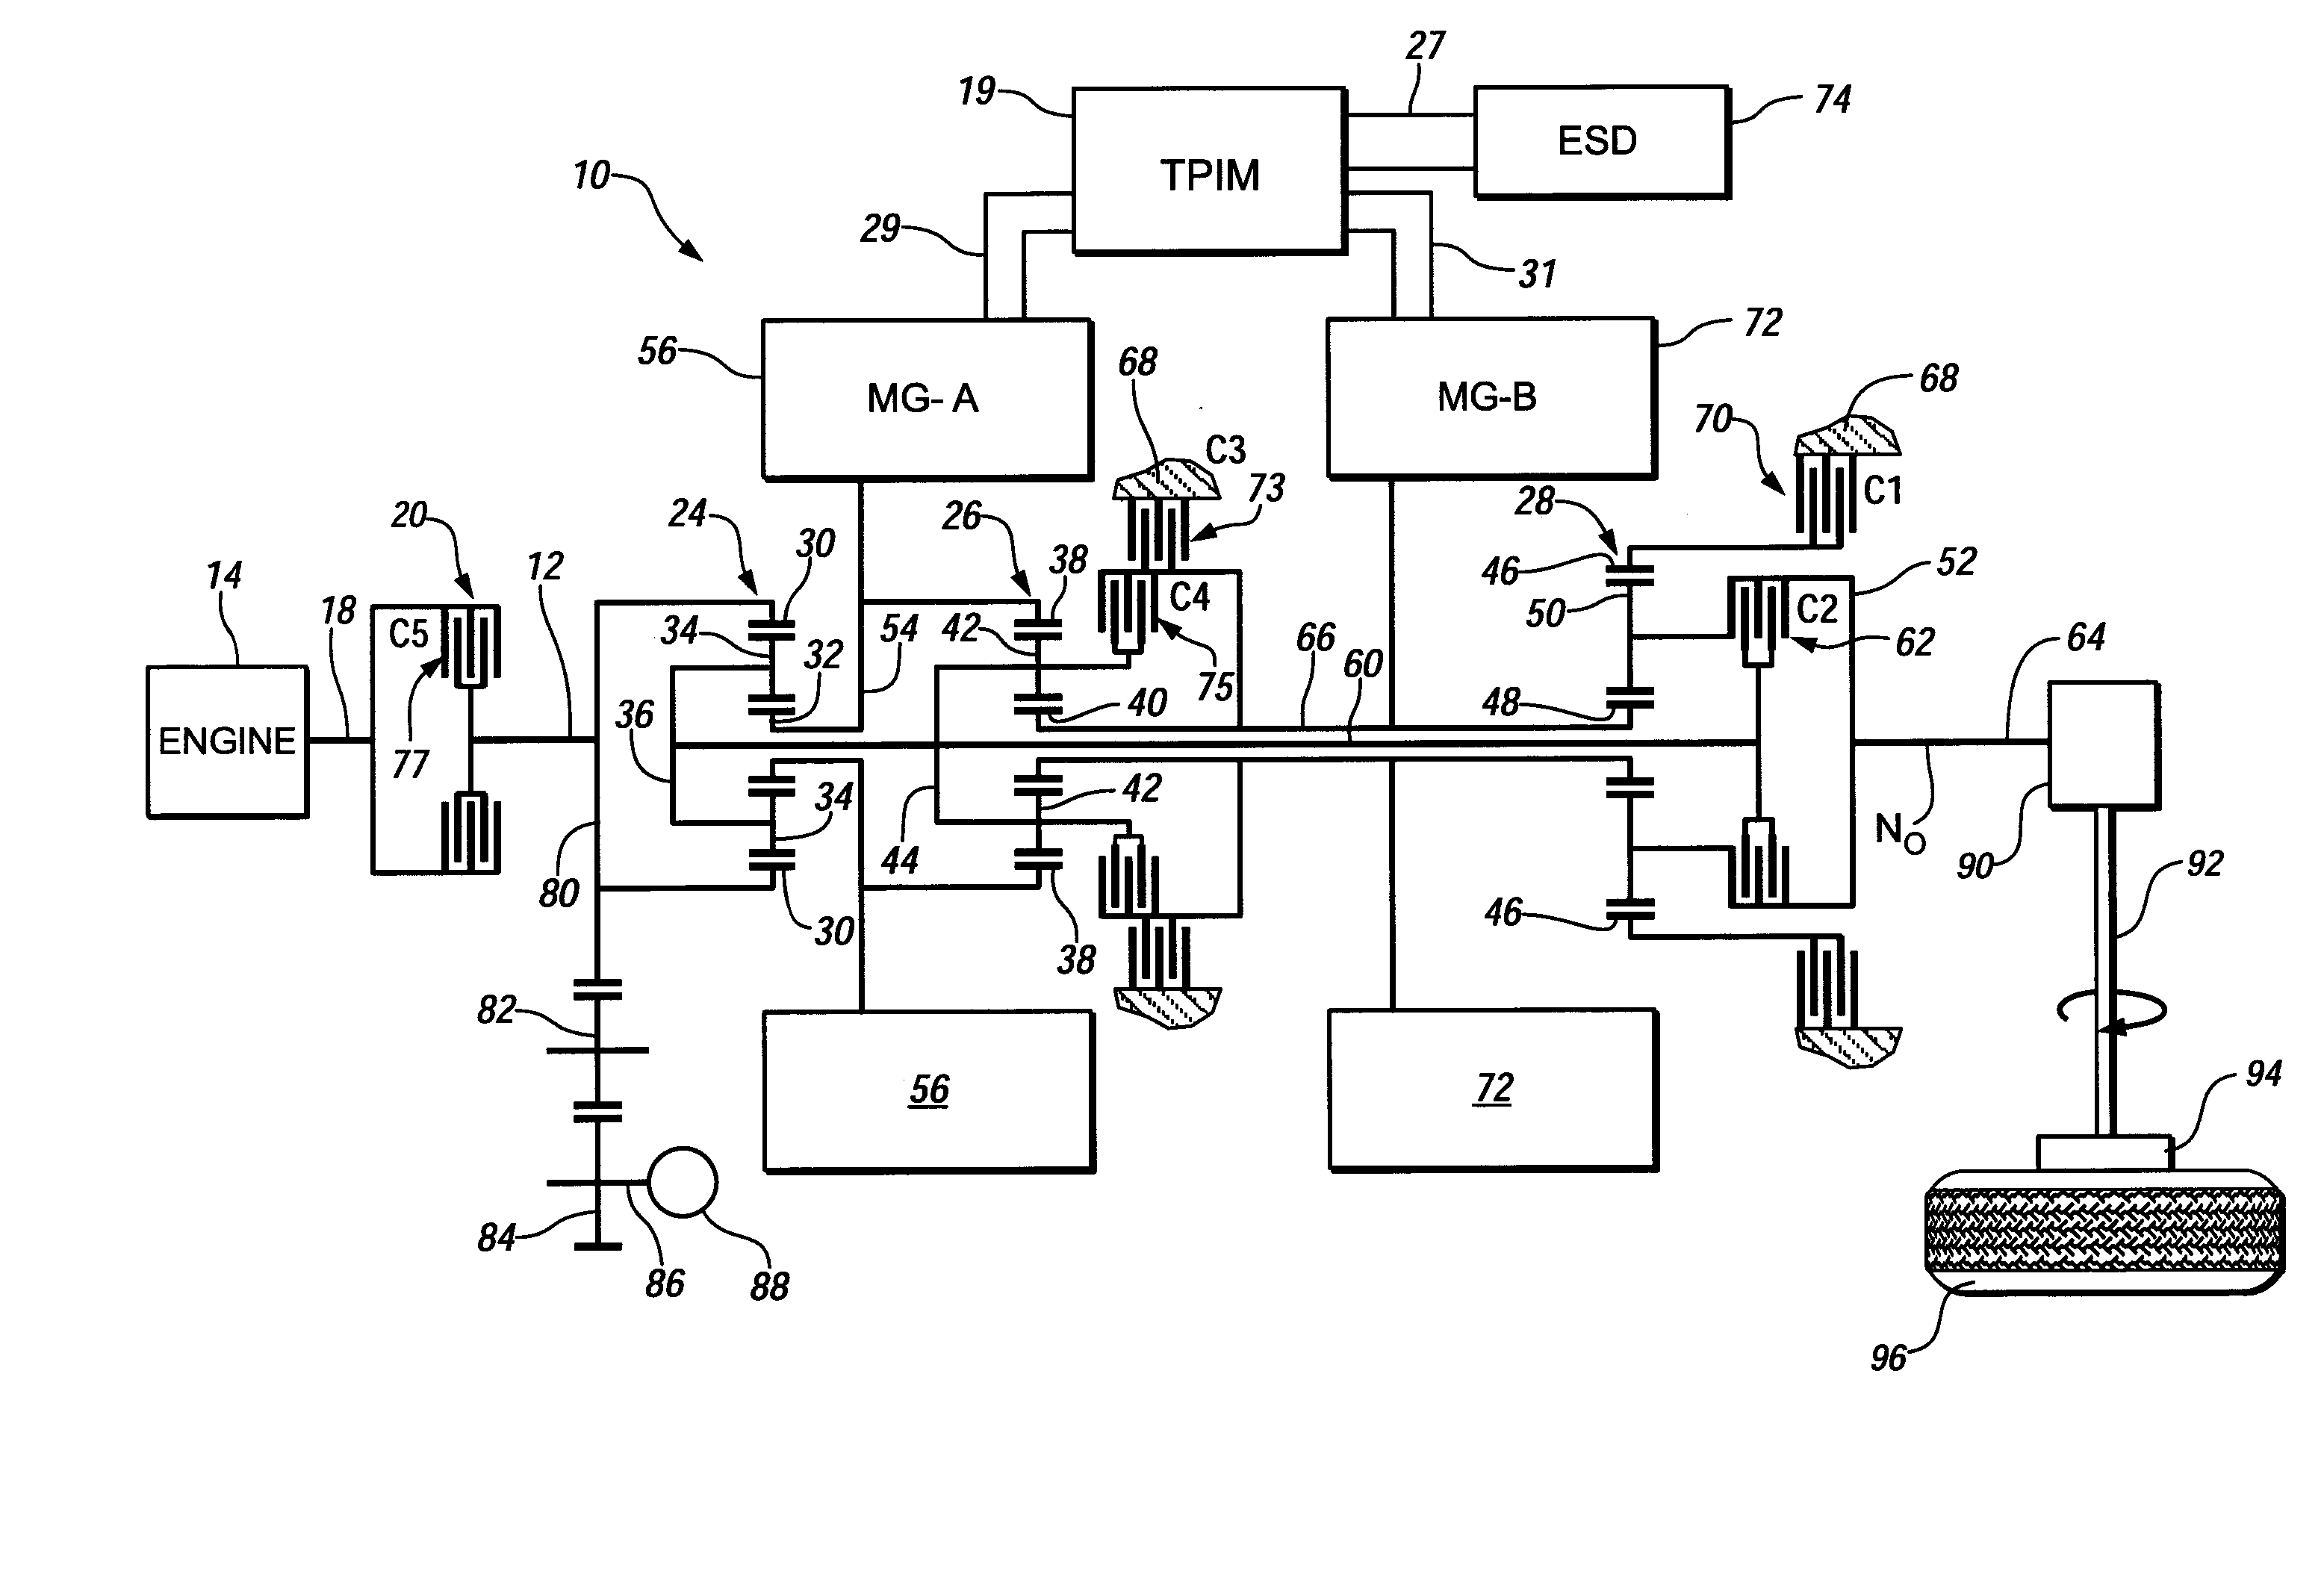 Method and apparatus to monitor operation of an auxiliary hydraulic pump in a transmission